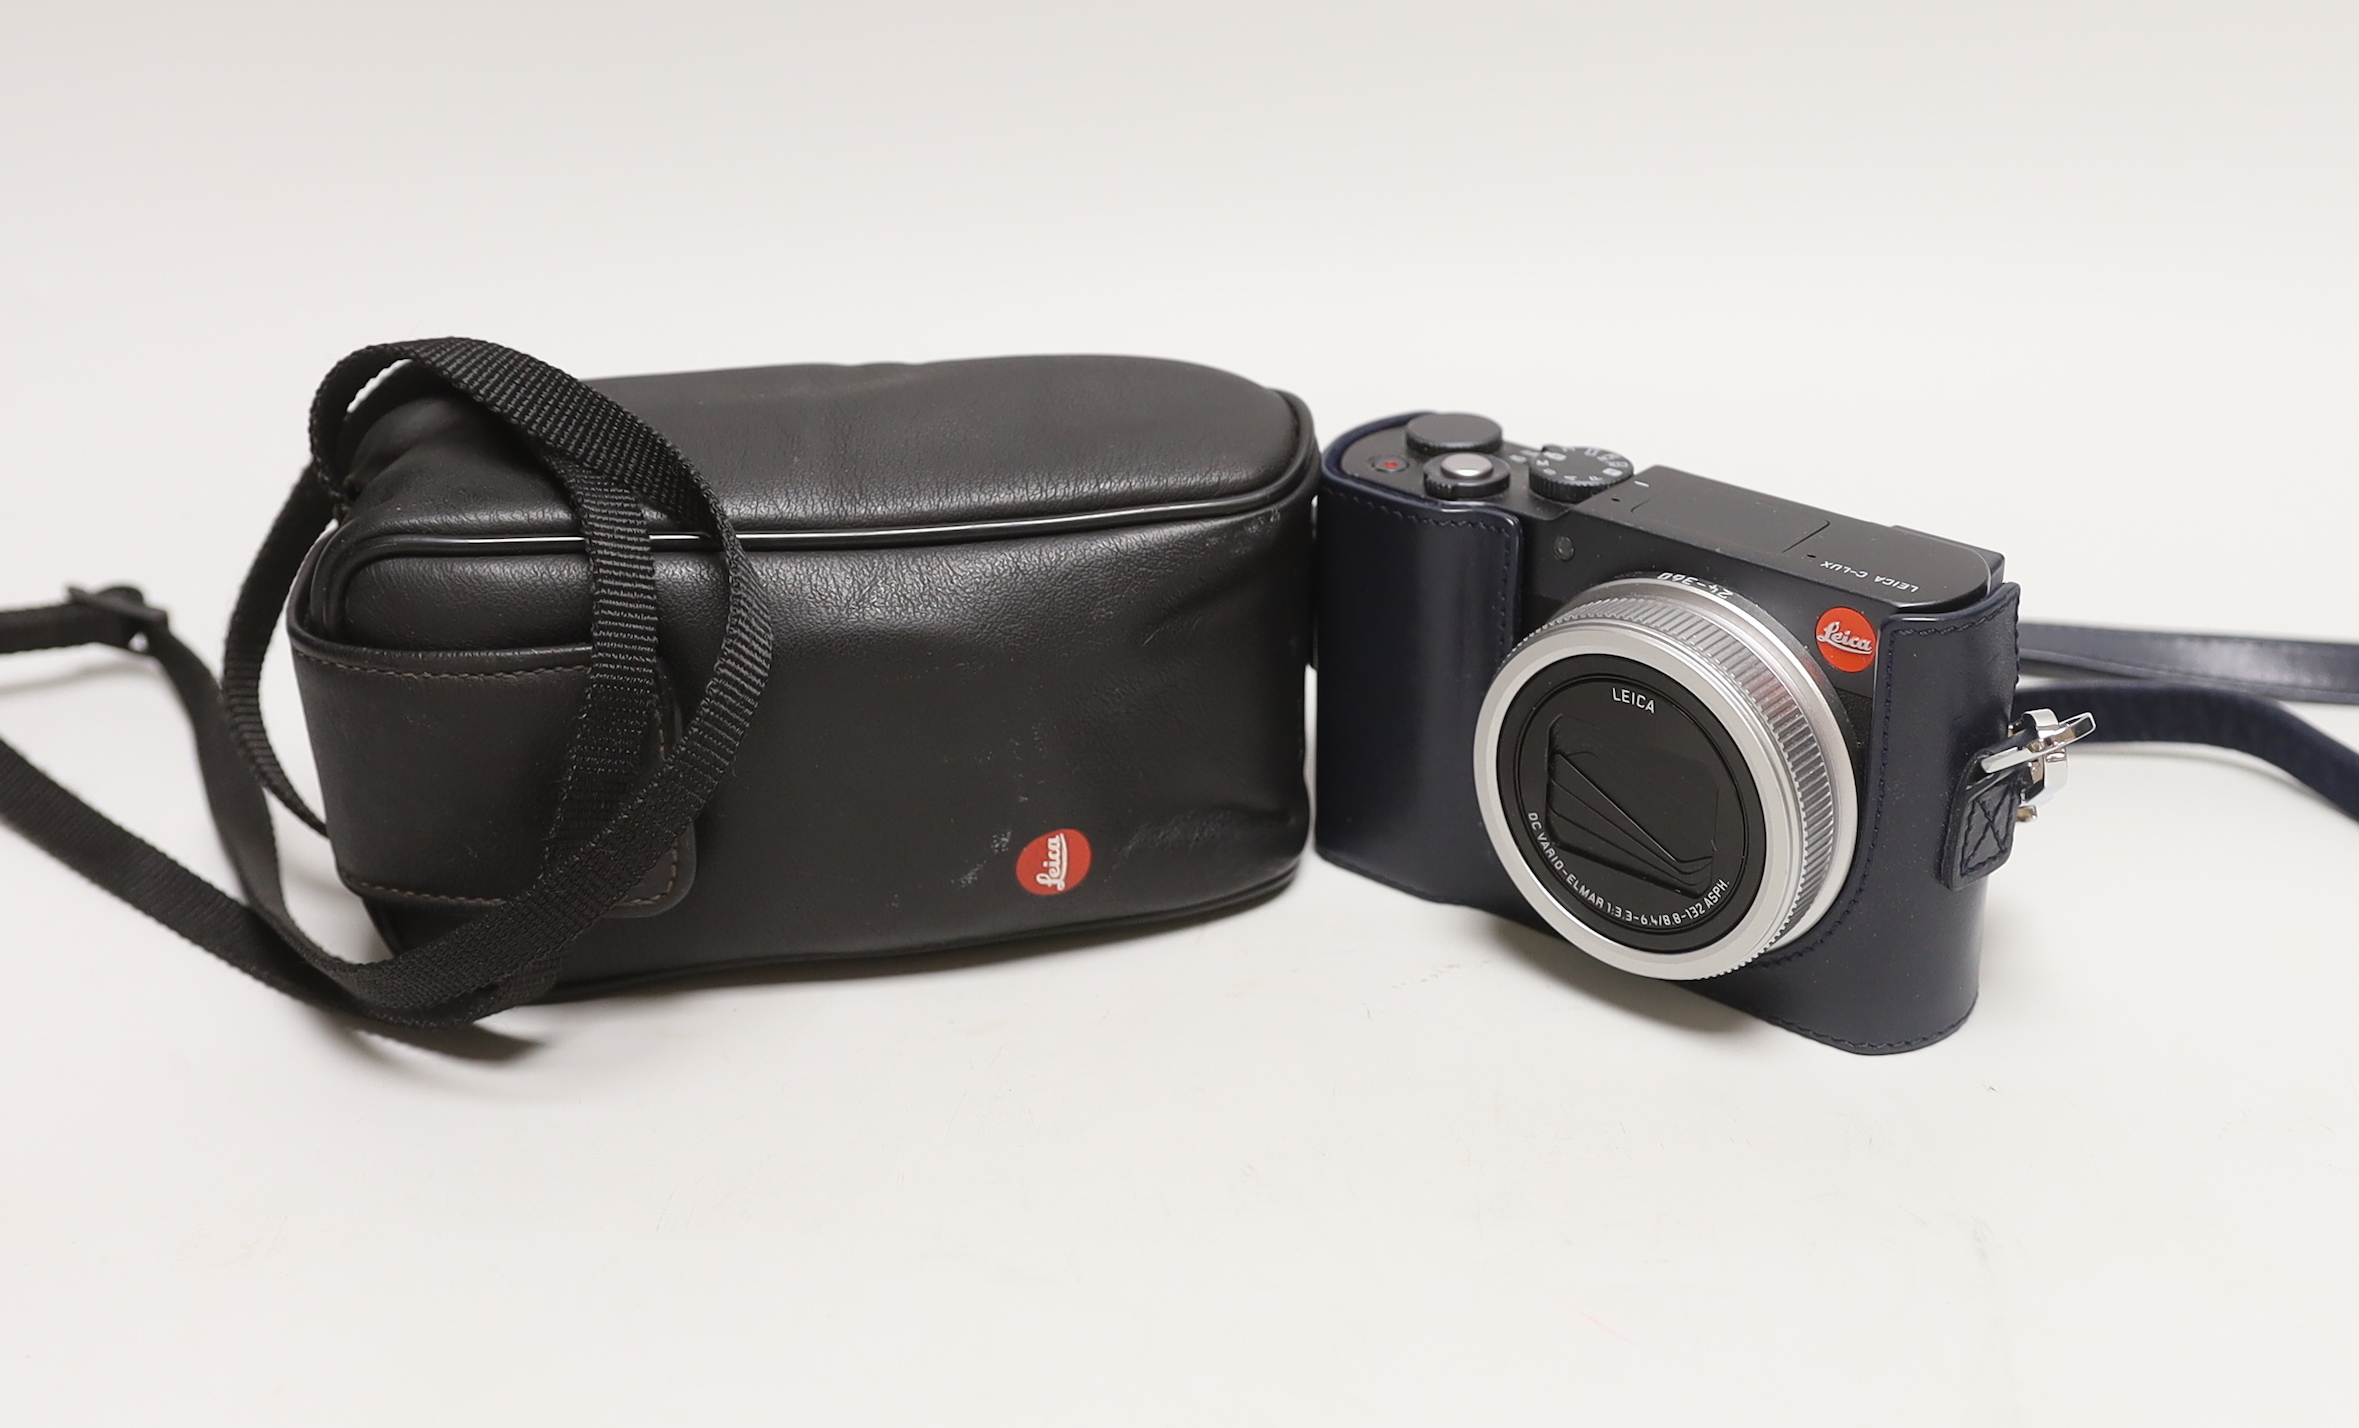 Two digital Leica cameras - a C-LUX and an AF-C1